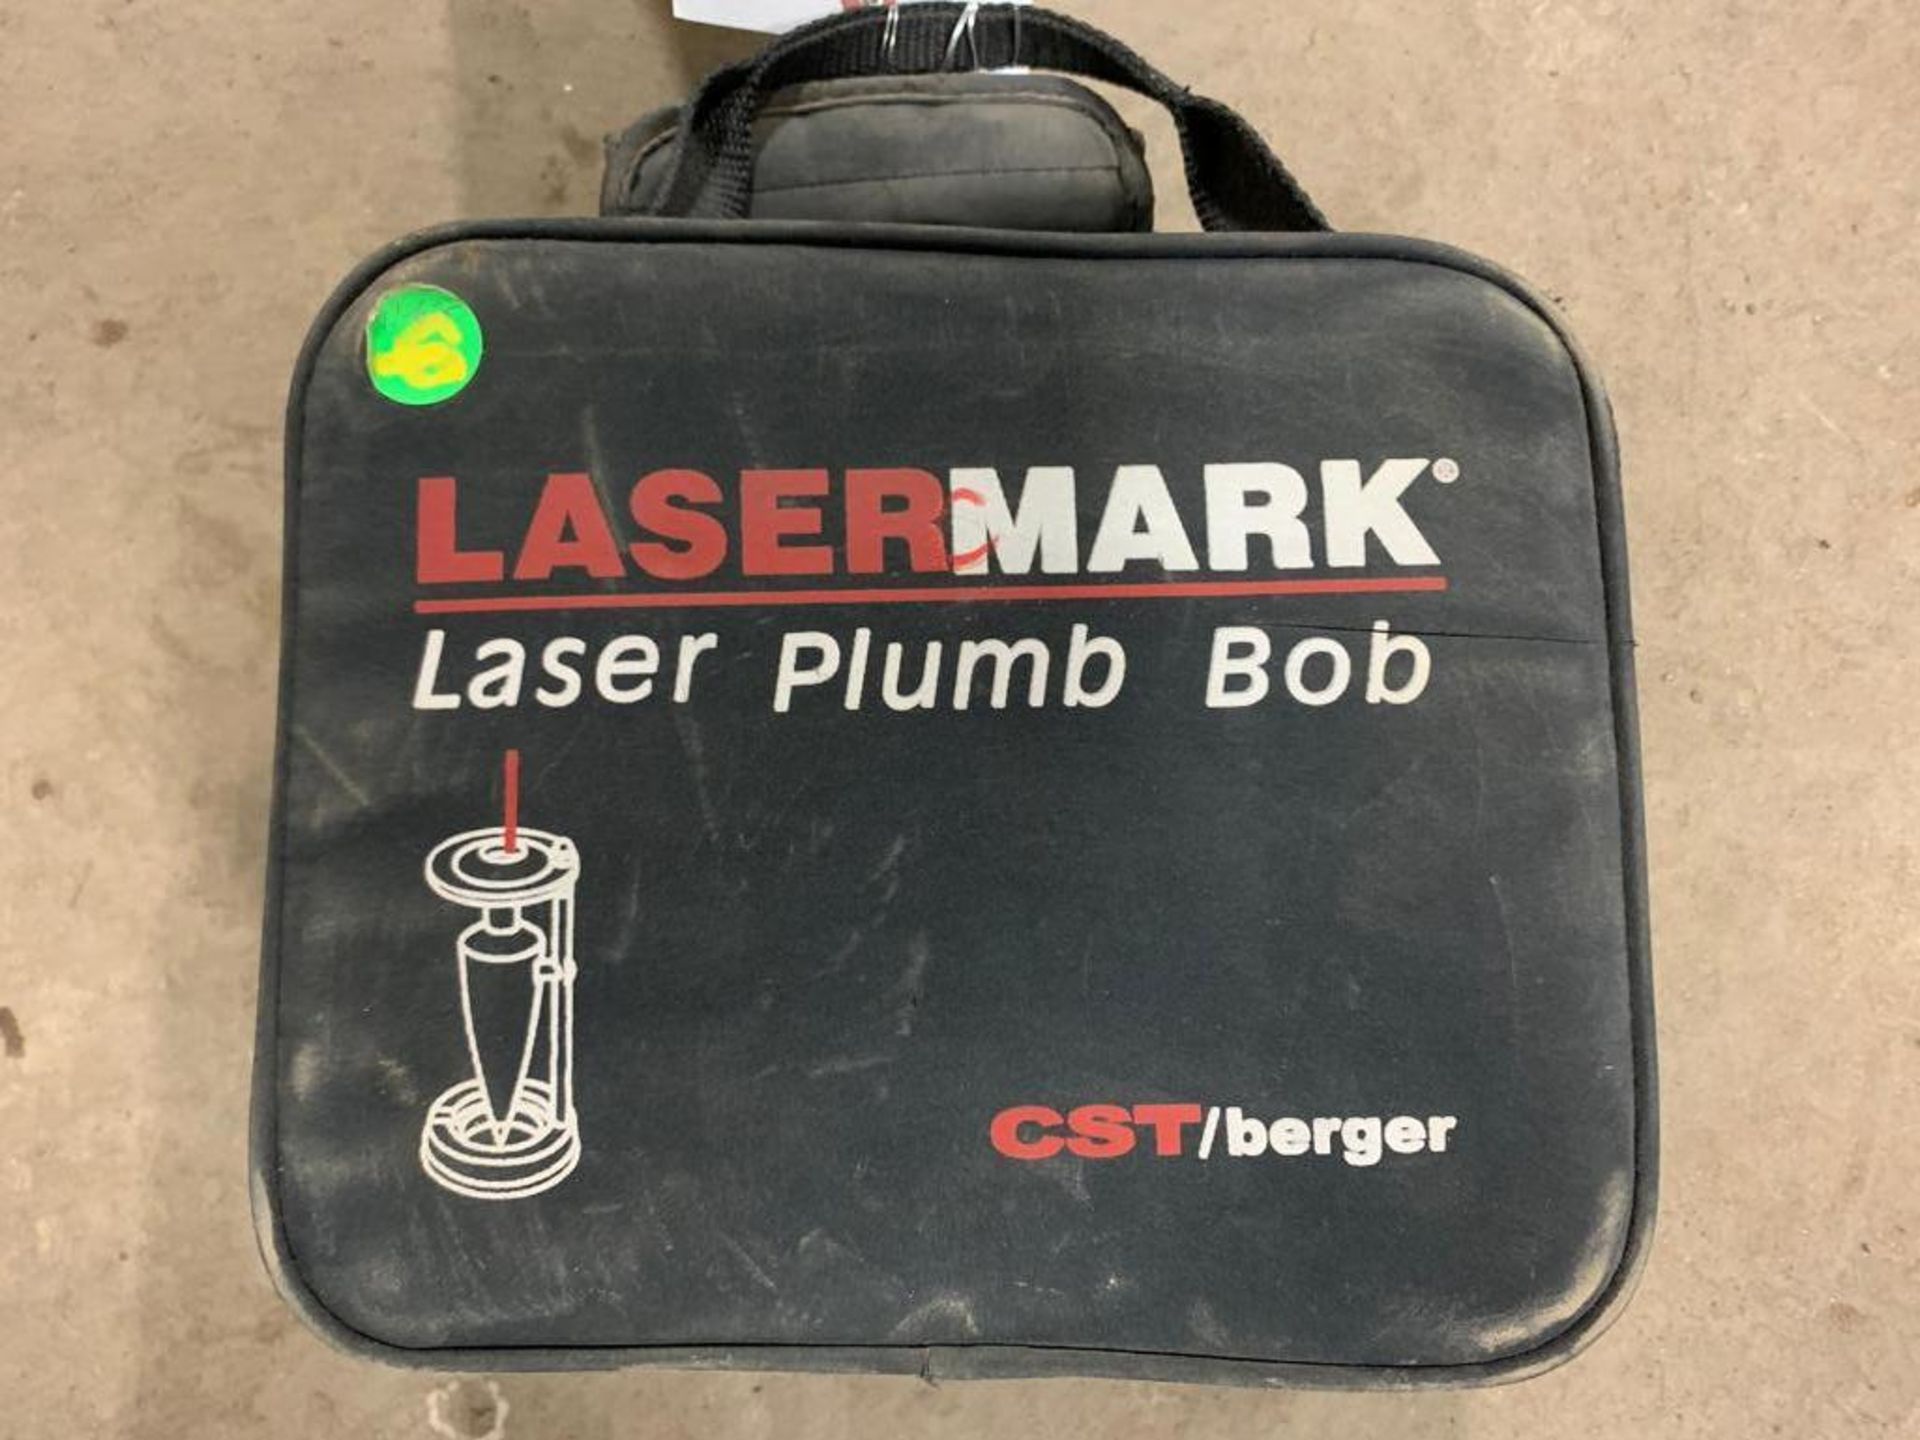 (1) CST Berger LaserMArk Laser Plumb Bob. Located in Des Moines, IA. - Image 5 of 5